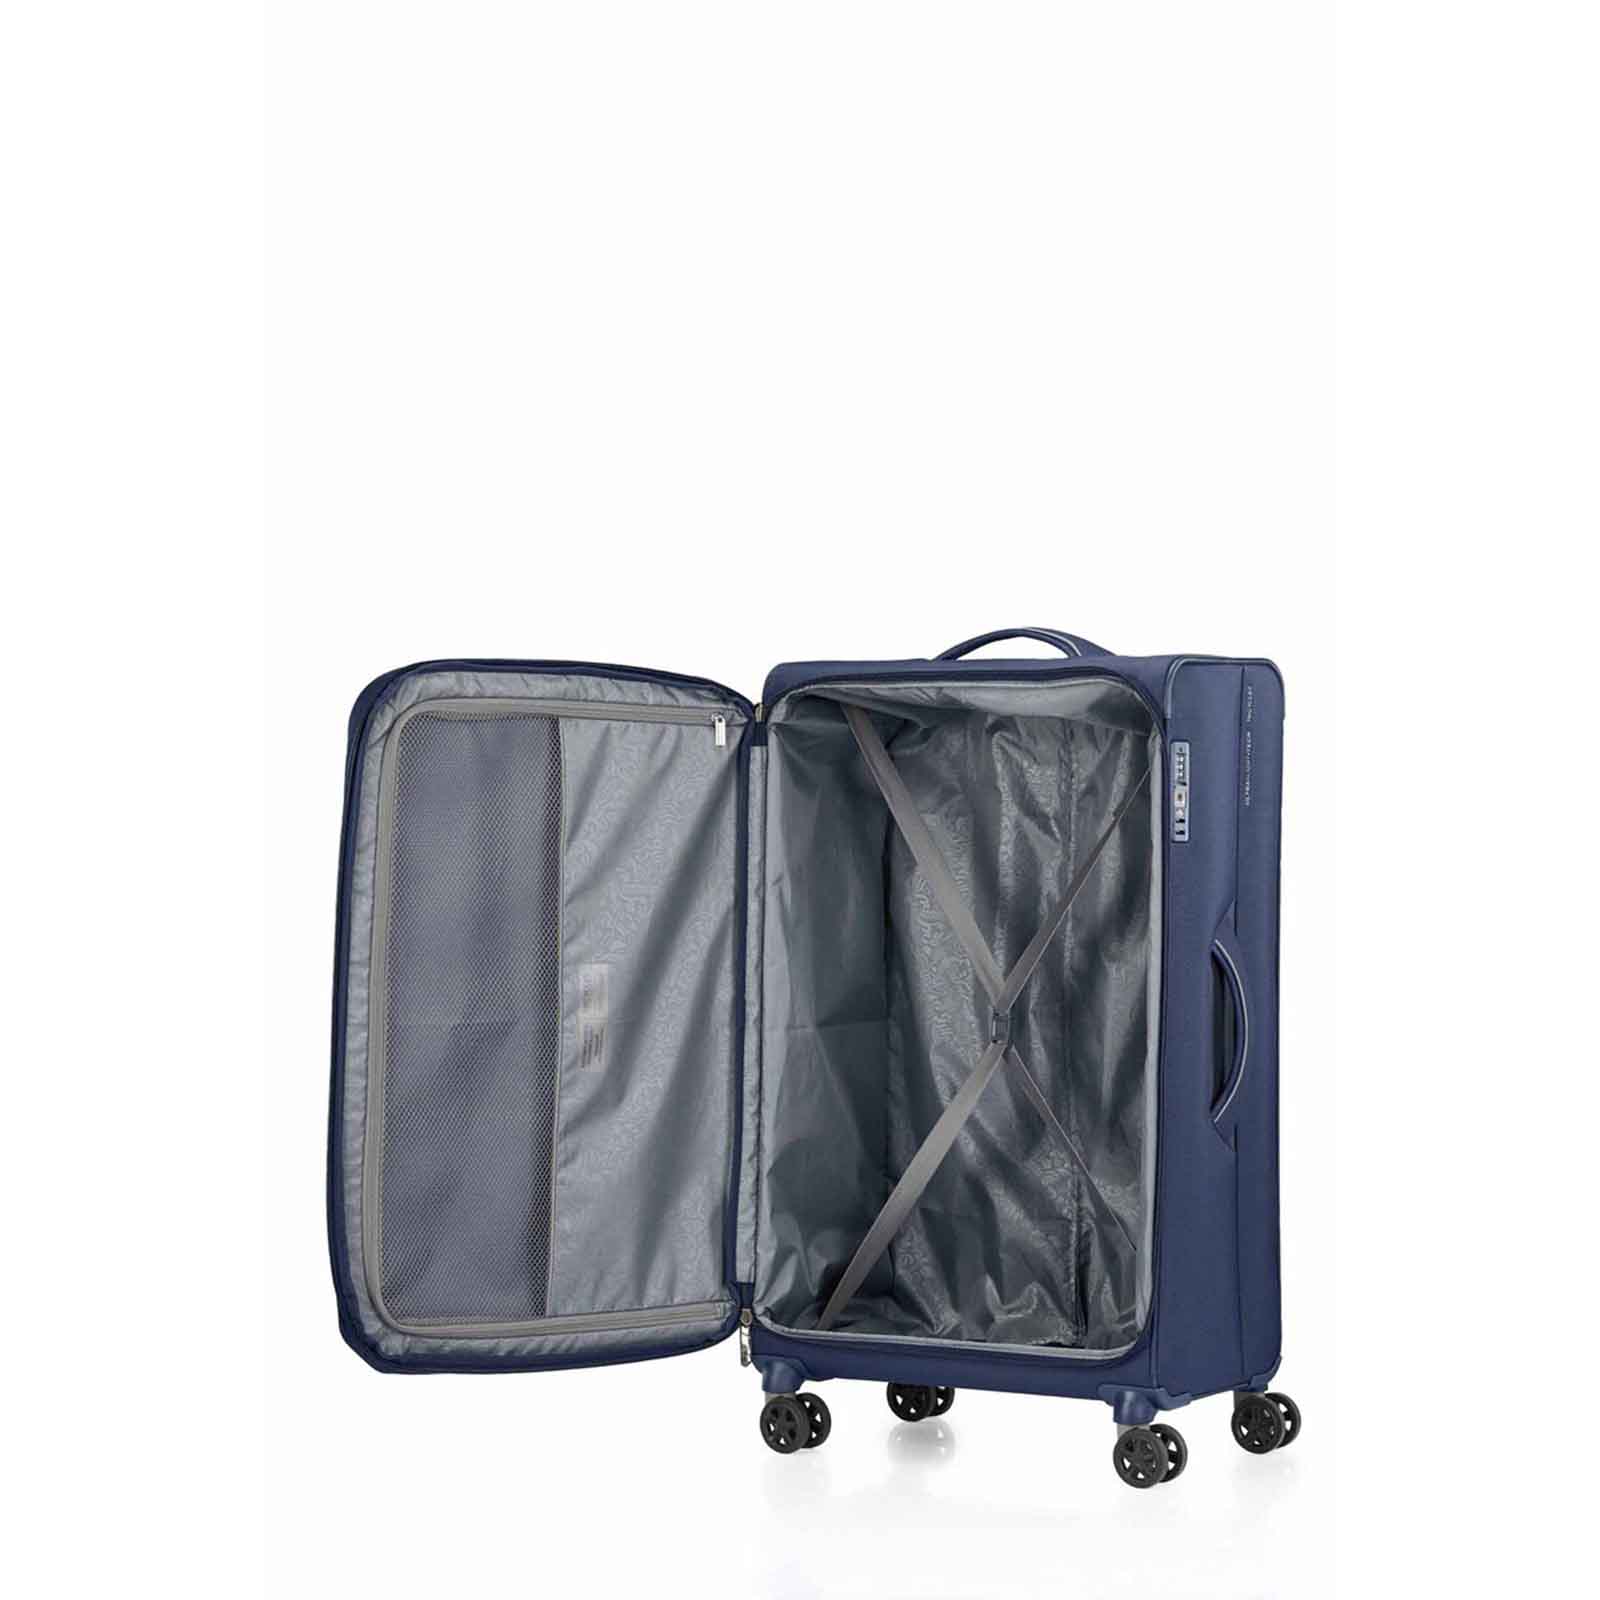 American-Tourister-Applite-4-Eco-82cm-Suitcase-Navy-Open